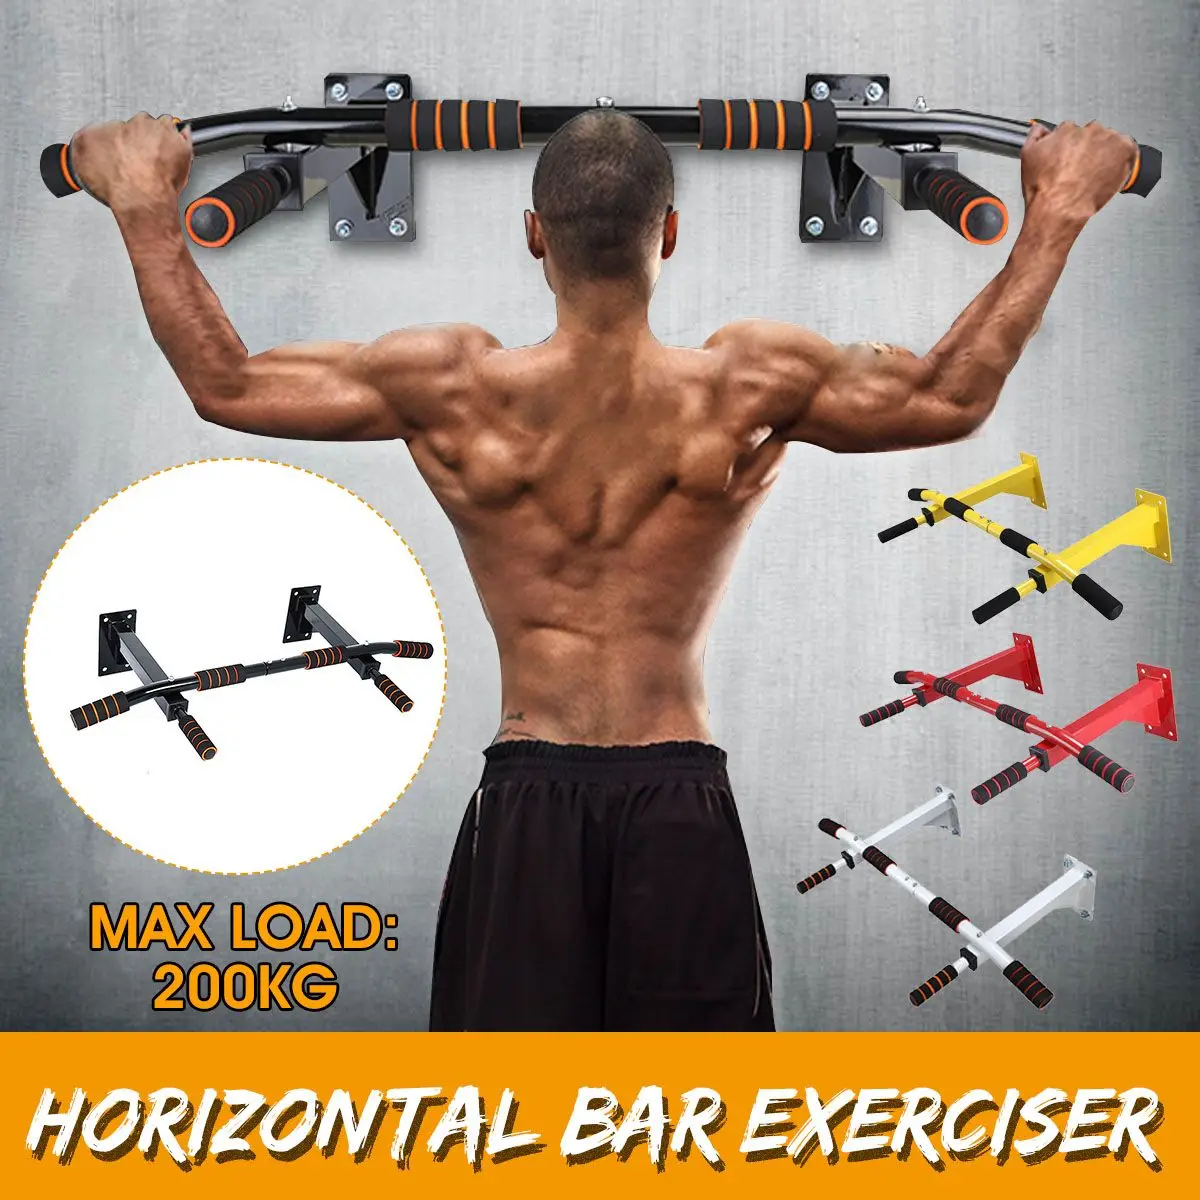 Upper Body Workout Bar with 4 Grip Positions Wall Mounted Pull Up Bar Resistance Band Workout Equipment 